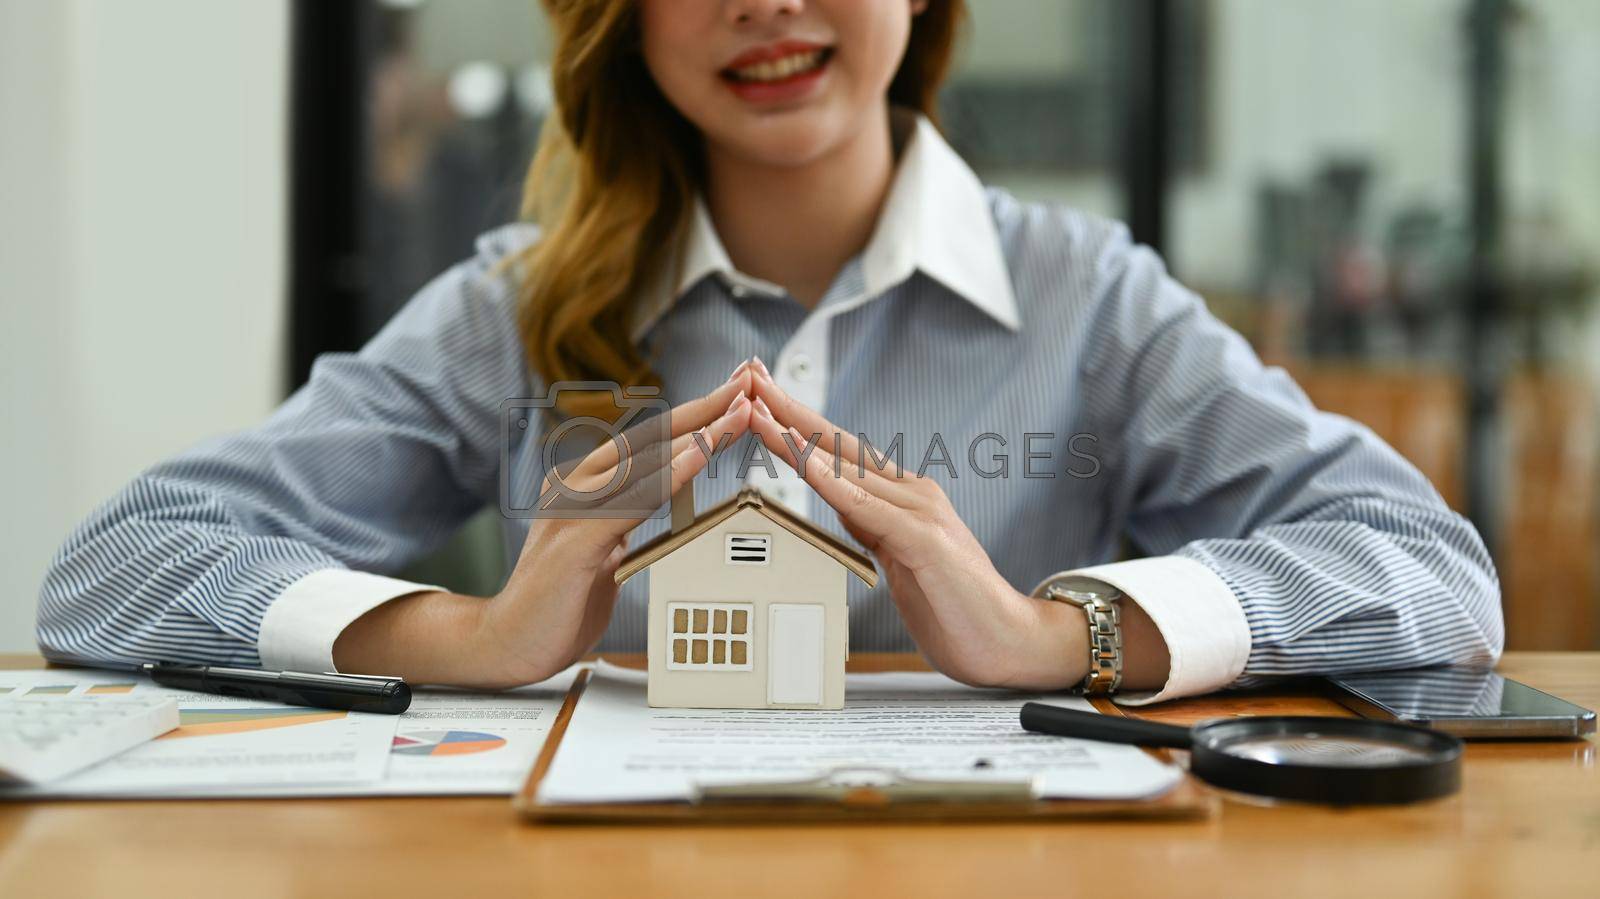 Royalty free image of Smiling woman hands protecting miniature house on wooden desk. Property insurance and reputable financing calm concept by prathanchorruangsak